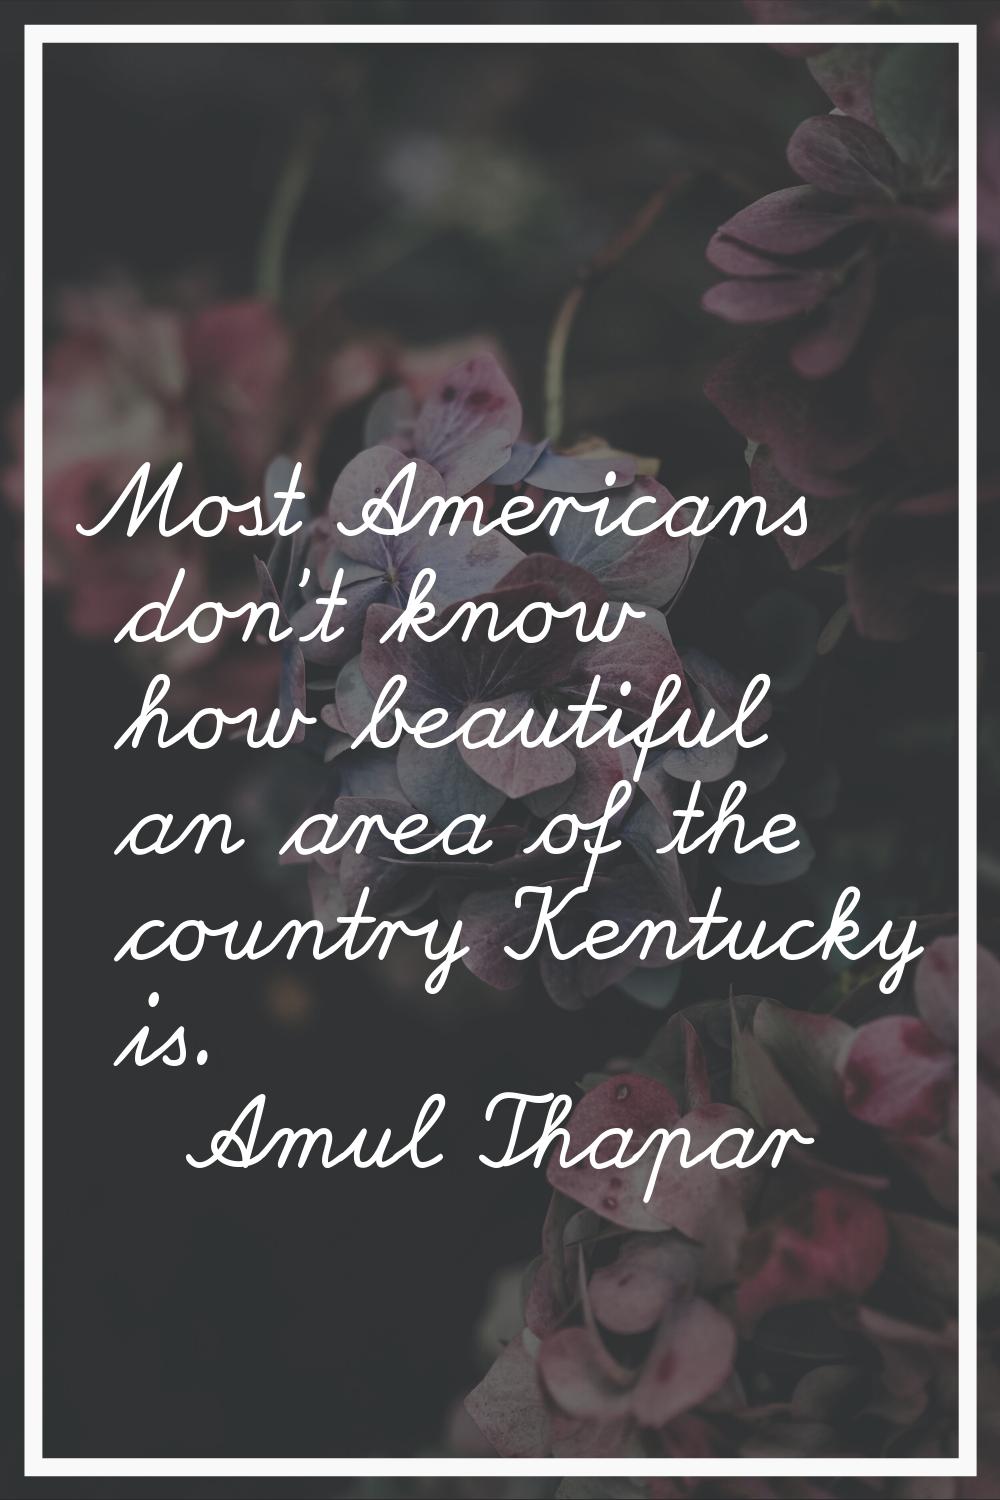 Most Americans don't know how beautiful an area of the country Kentucky is.